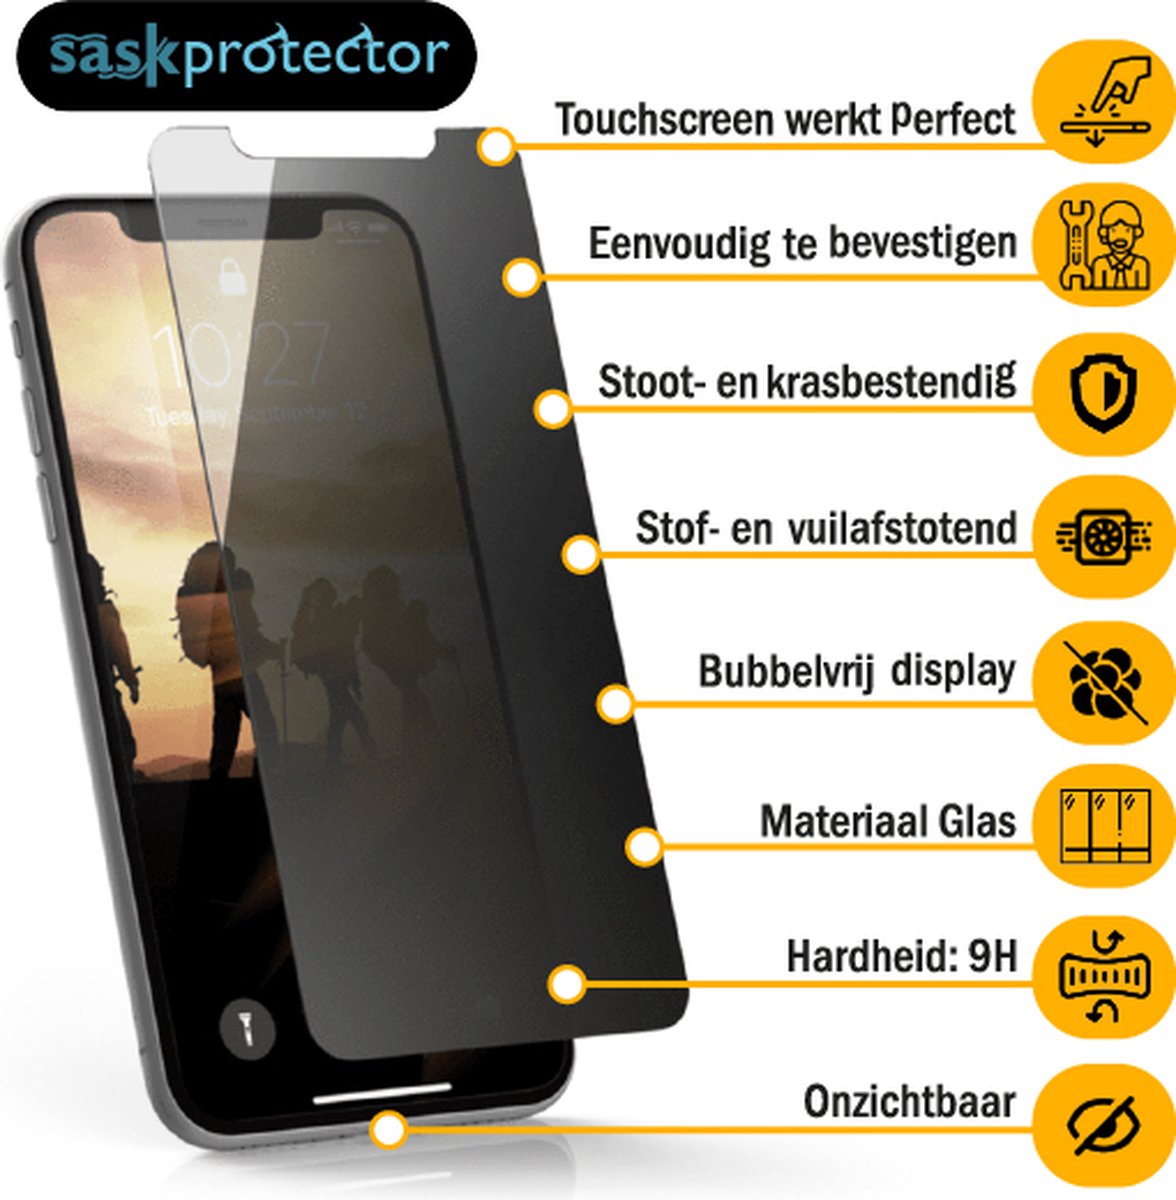 Privacy Screen Protector Iphone X/XS/11 PRO